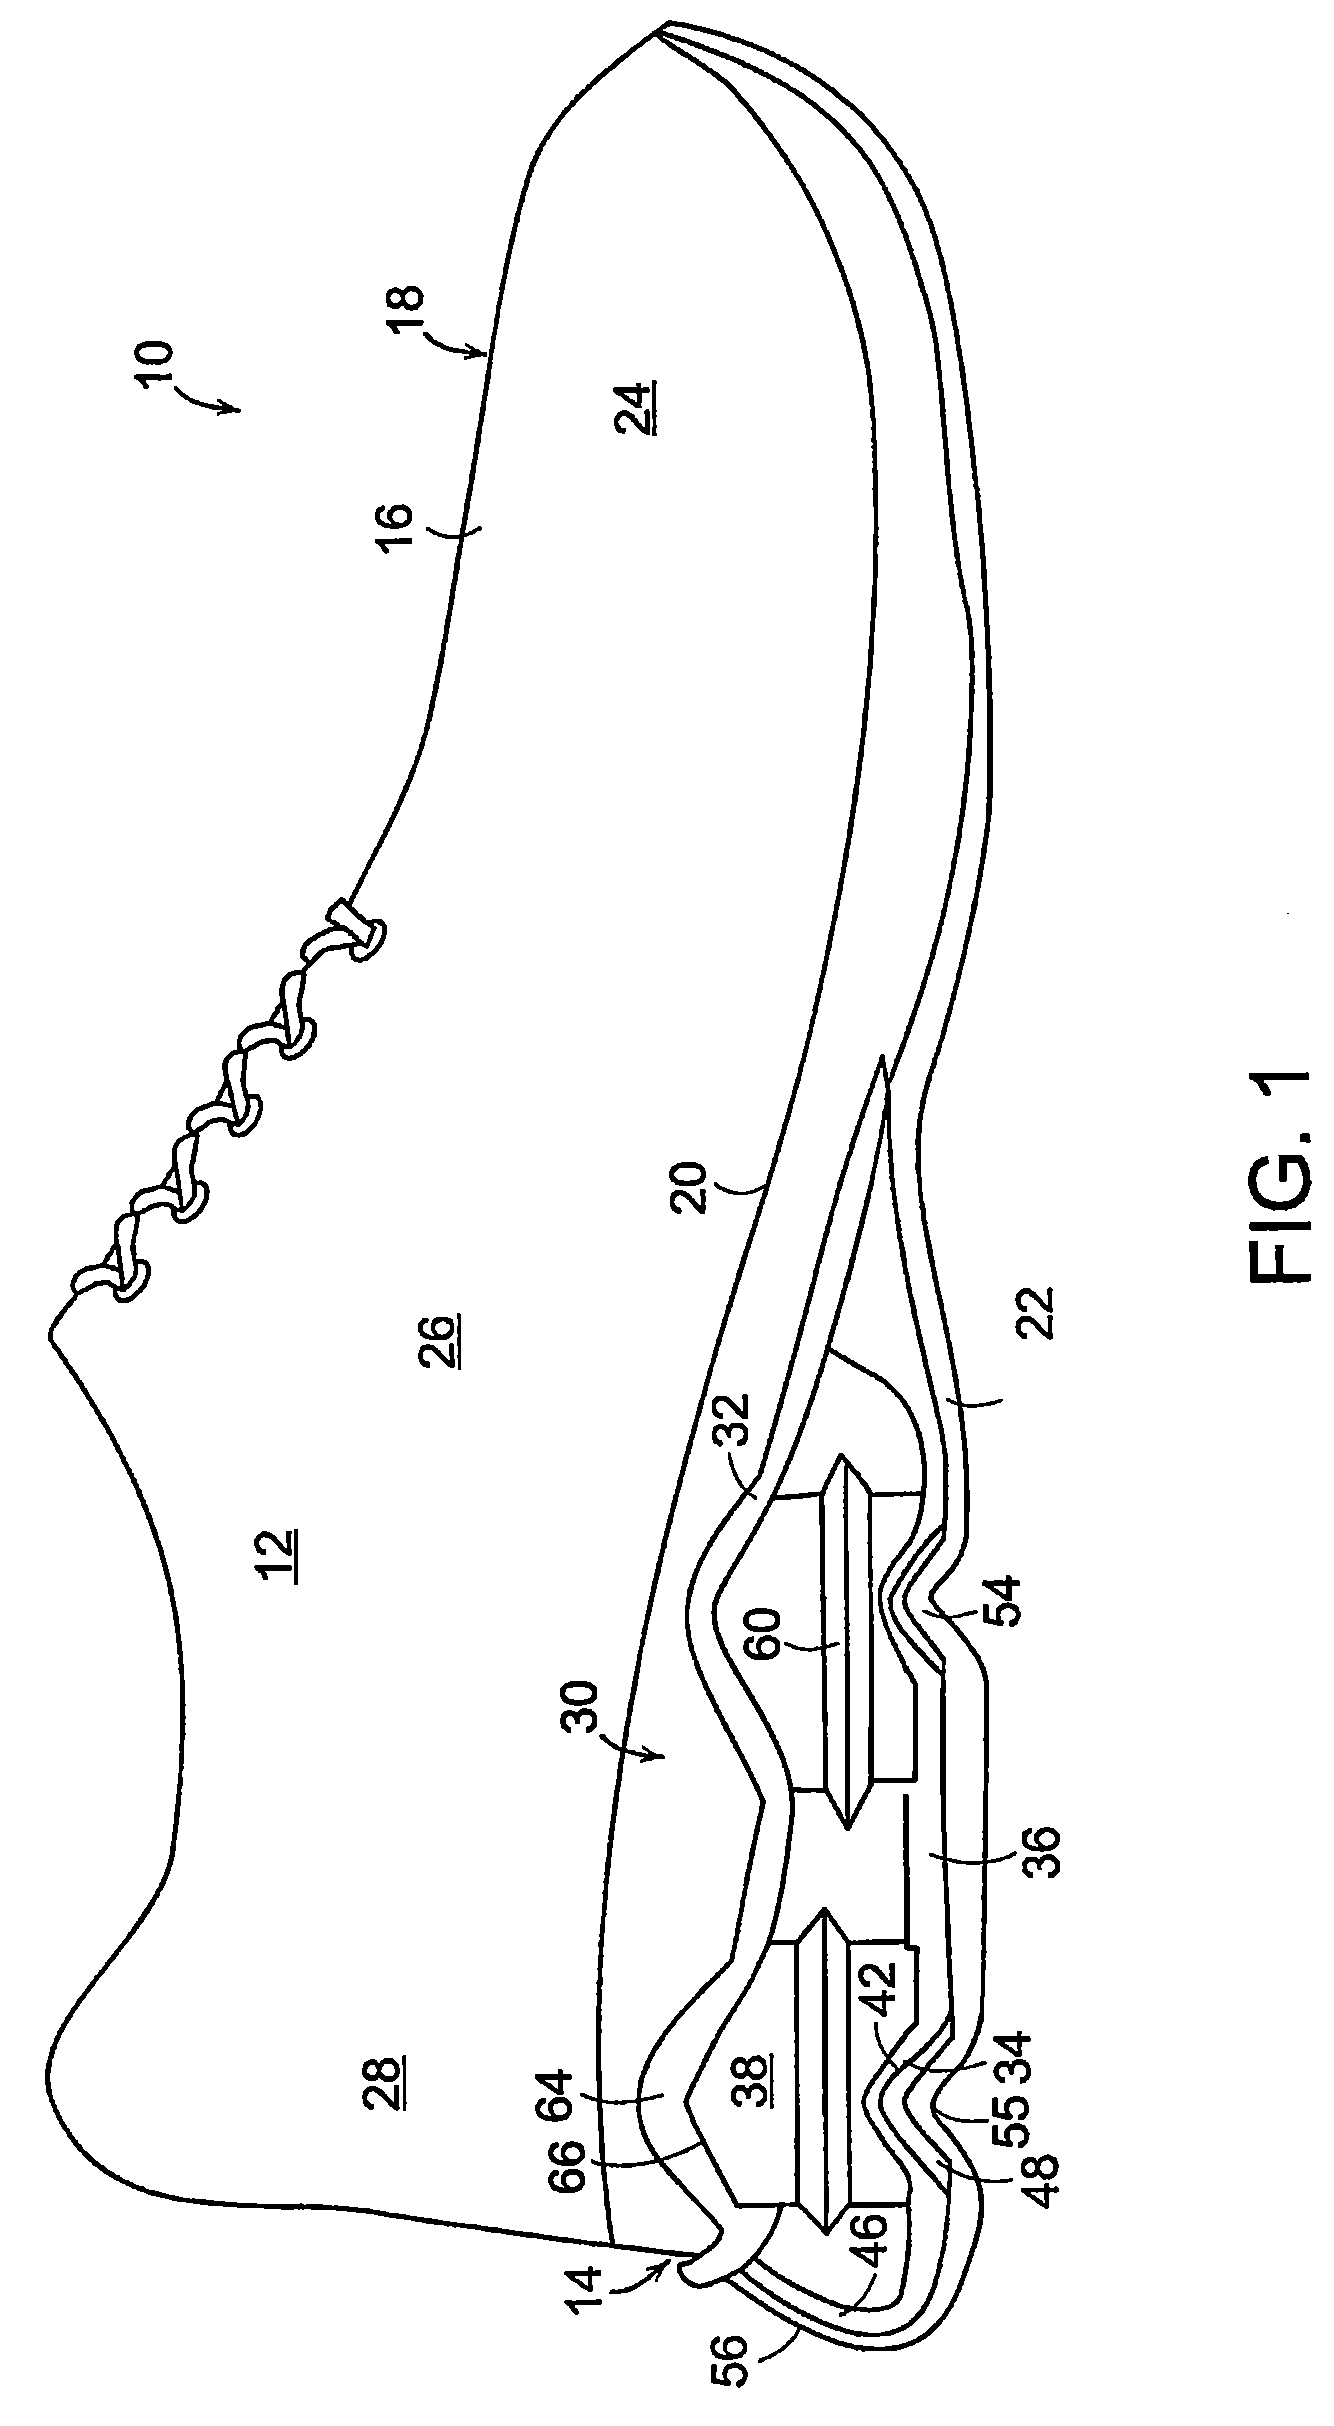 Article of footwear with support assembly having plate and indentations formed therein